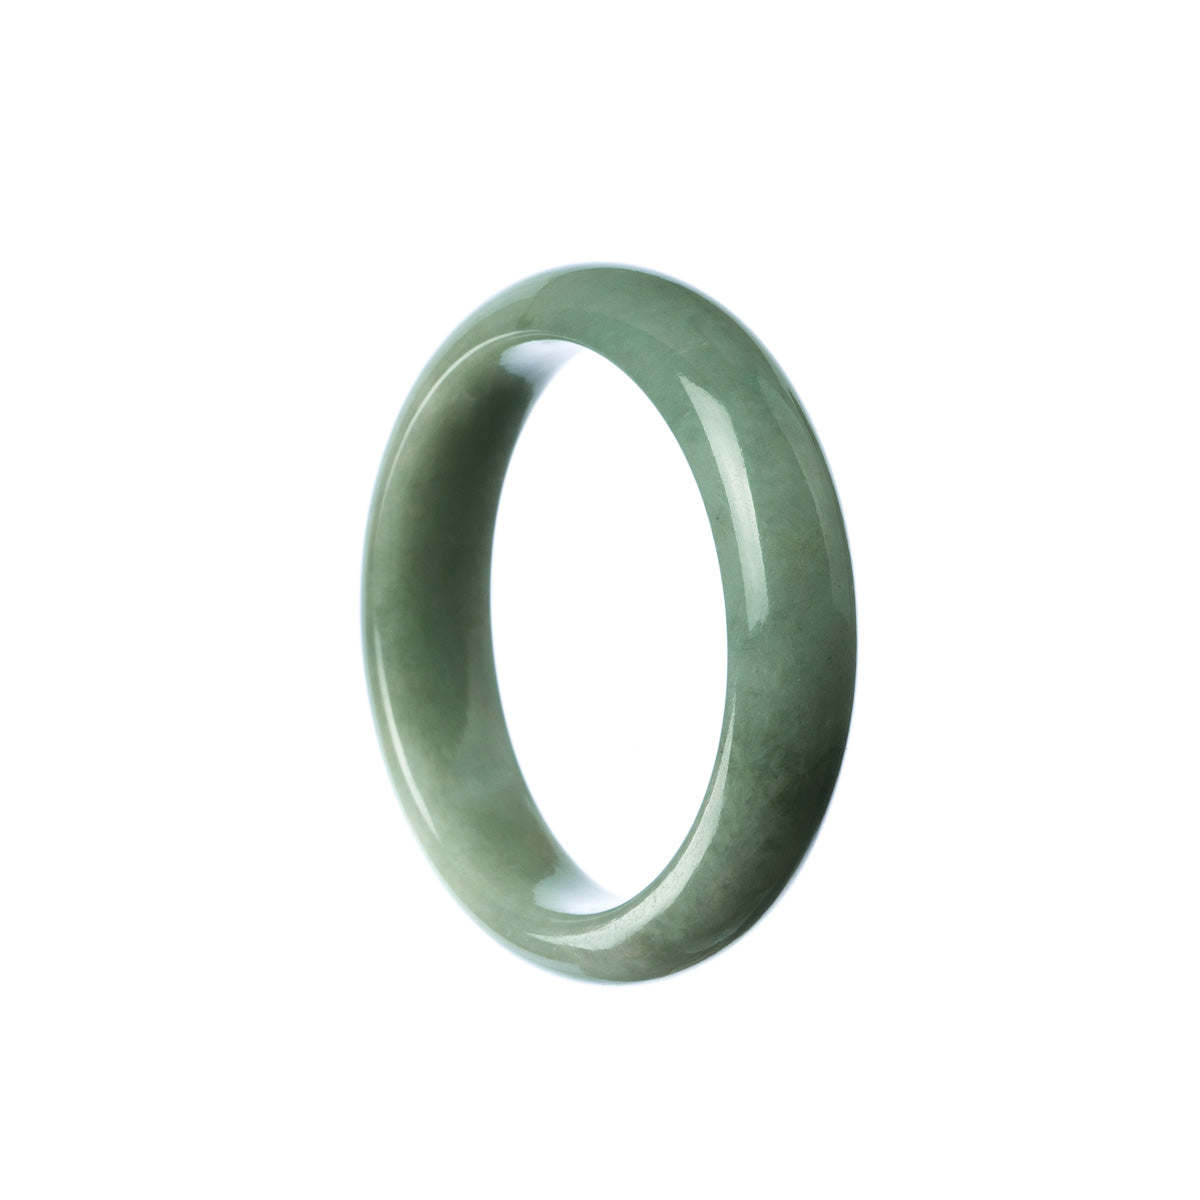 A small round green jadeite jade bangle for children, made from genuine type A jade.